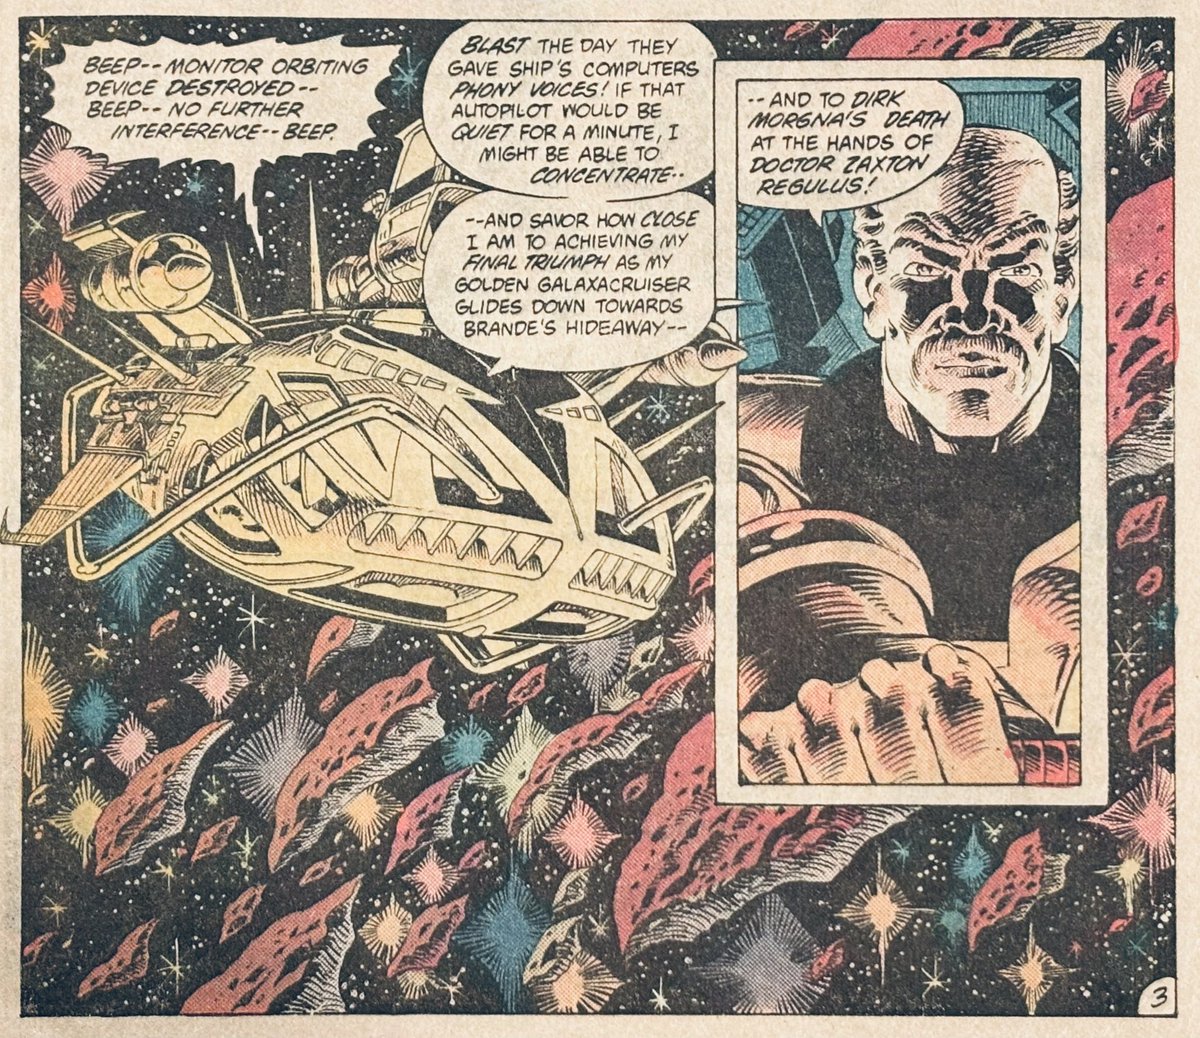 Doctor Regulus and his Golden Gliding Galaxacruiser by artists Pat Broderick and Bruce Patterson. Legion of Super-Heroes #286 (1982) #LongLiveTheLegion